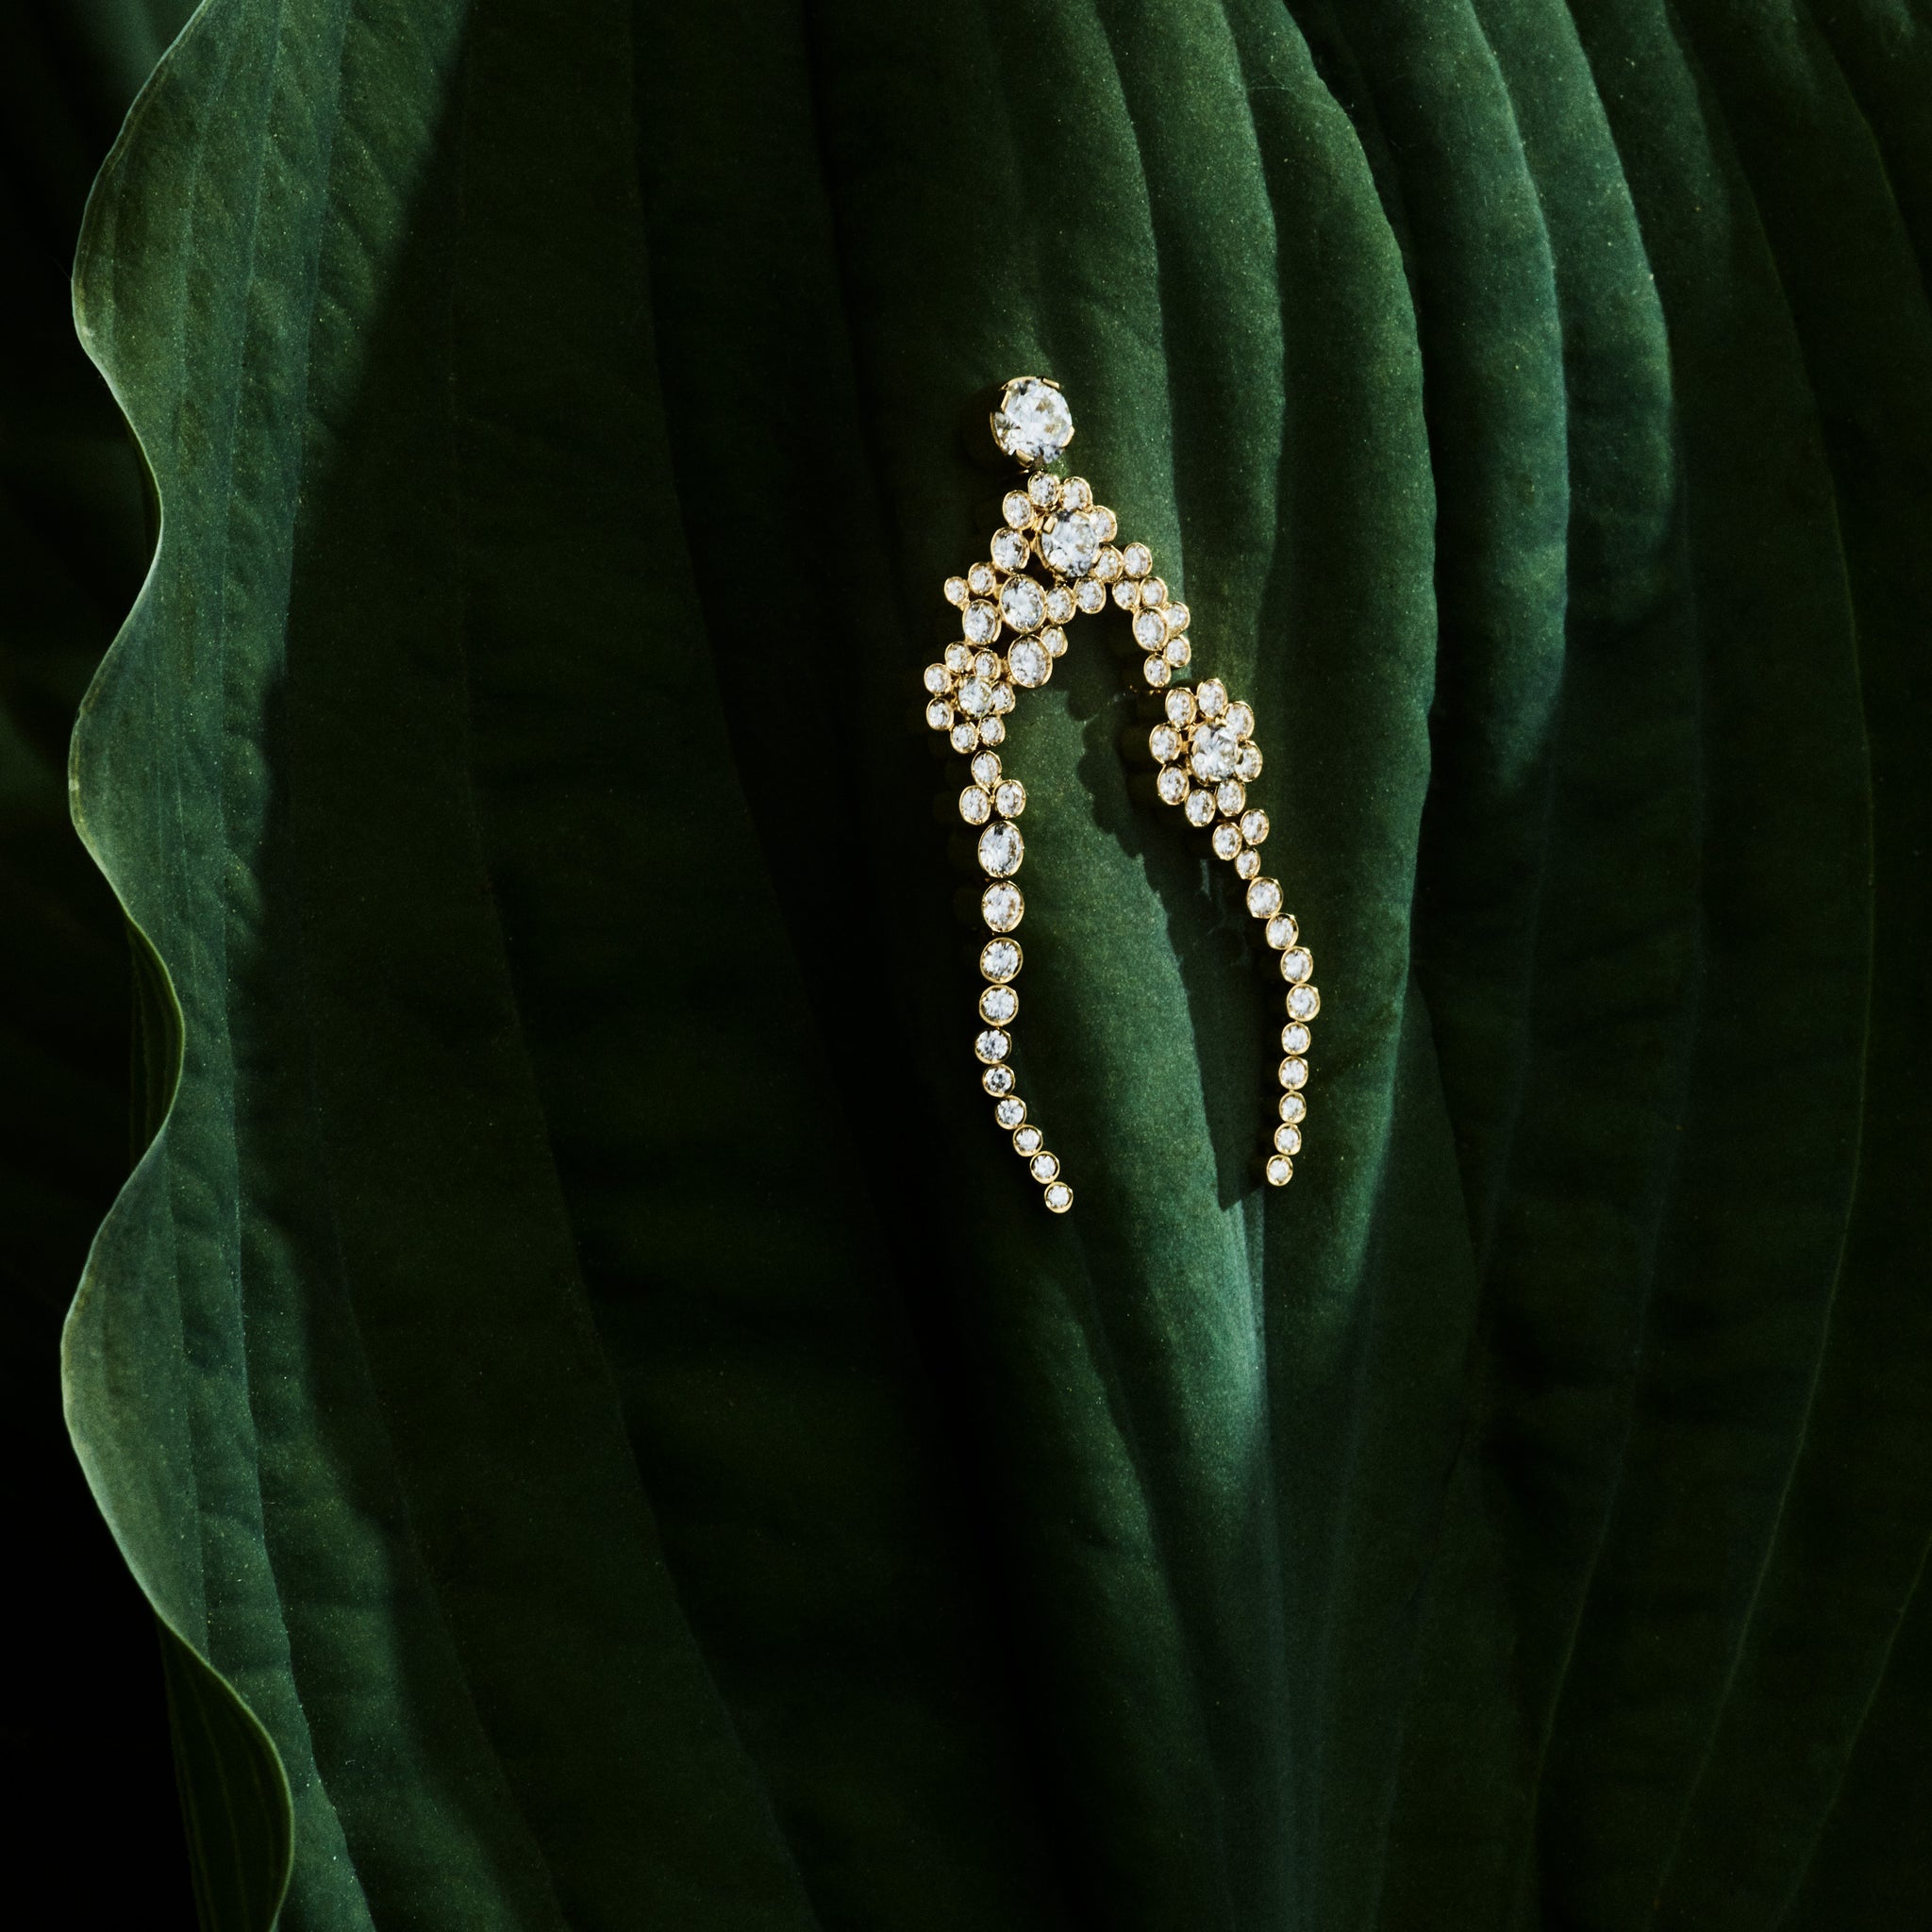 Picture showing Fontaine diamond earring placed on a green leaf